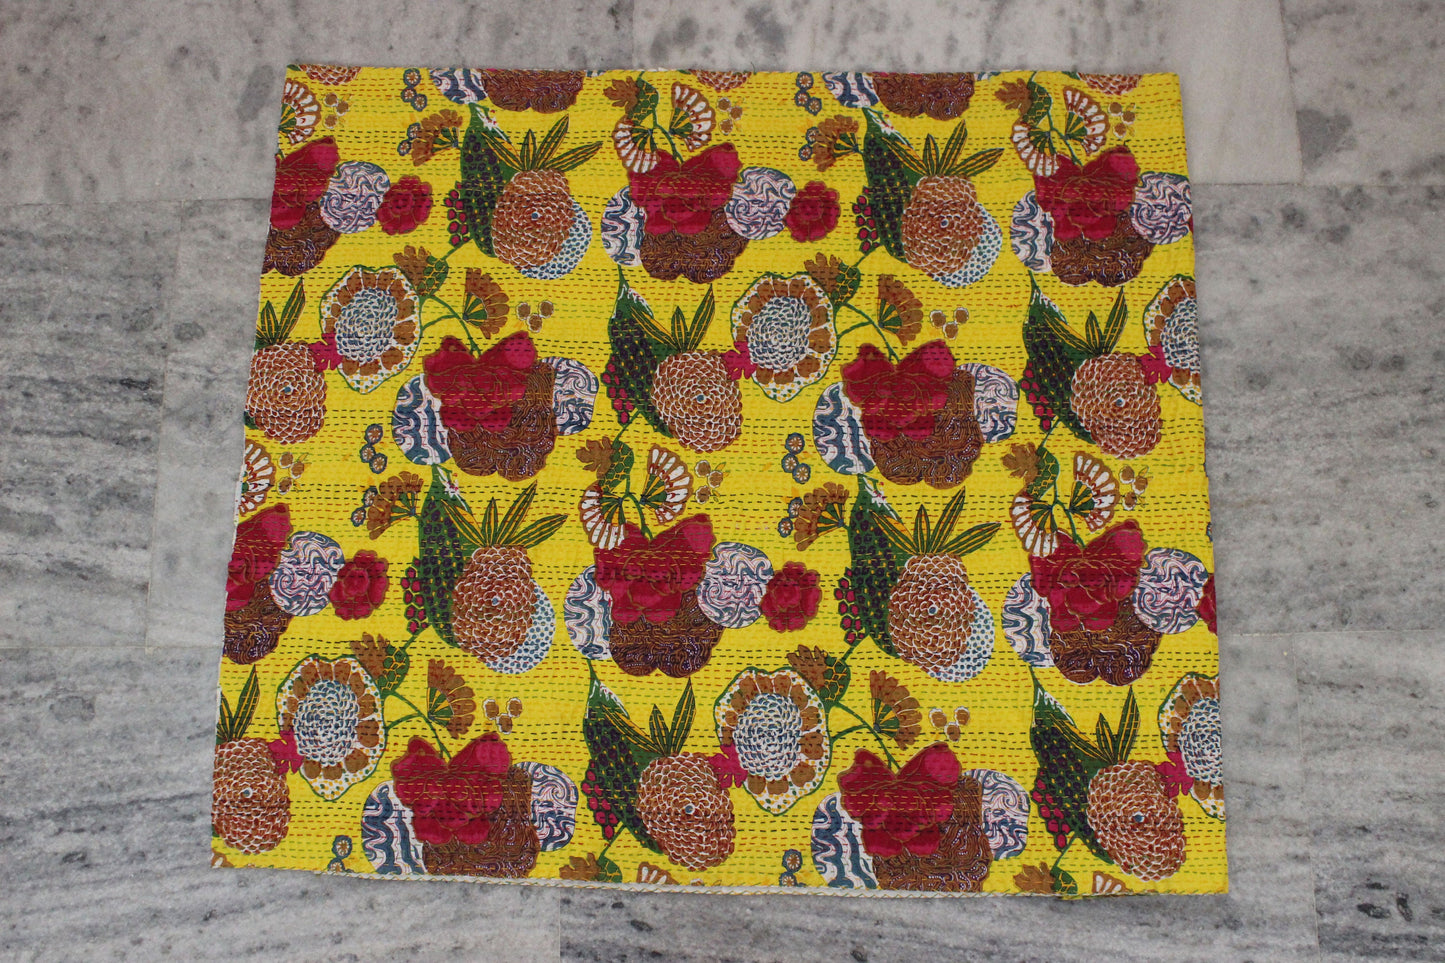 Yellow Gypsy Fabric By The Yard Floral Indian Textile Fabric Embellished Indian Fabric Embroidered Printed Dress Fabric Kantha Boho Fabrics